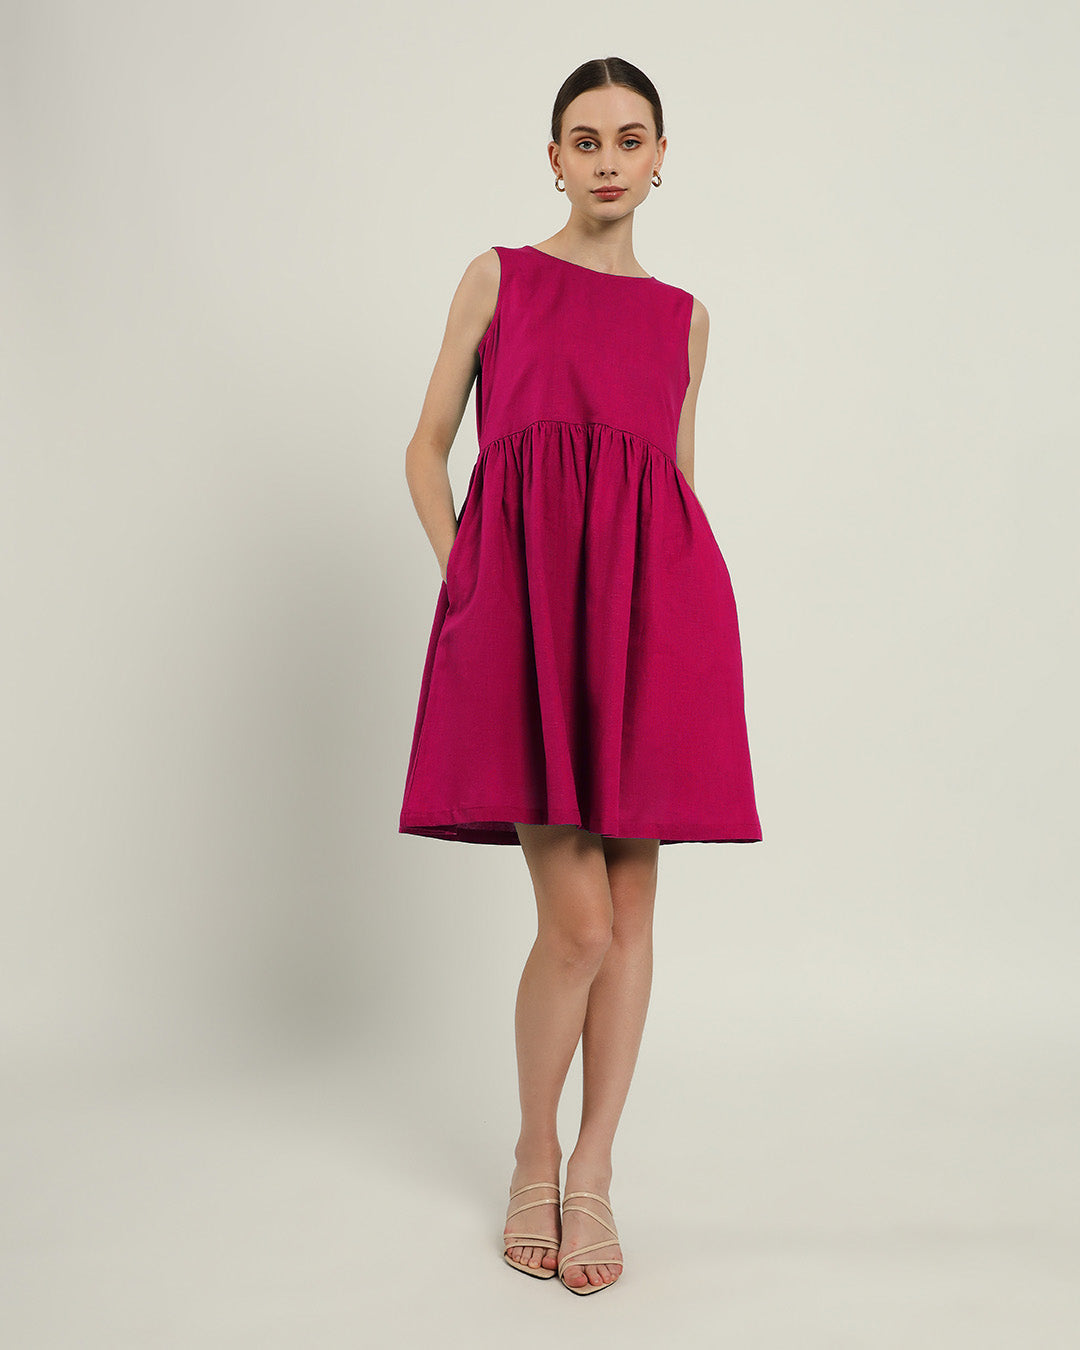 The Chania Berry Dress